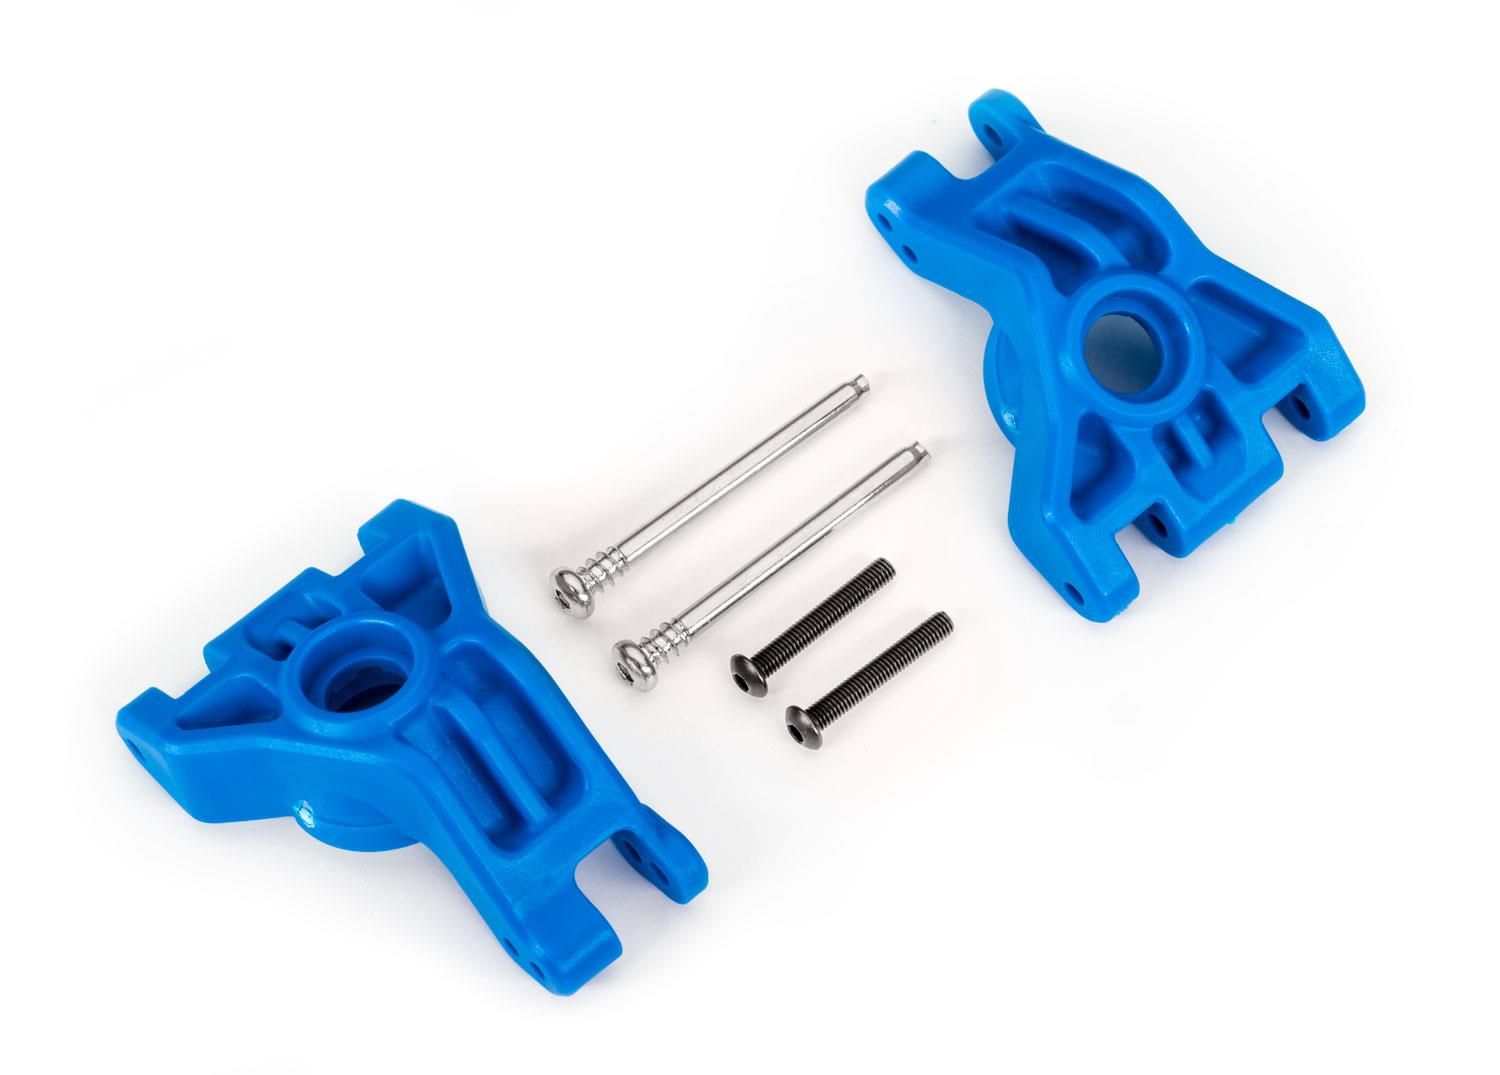 Traxxas - Carriers Left/Right (for use with #9080 upgrade kit) - Blue (TRX-9050X)